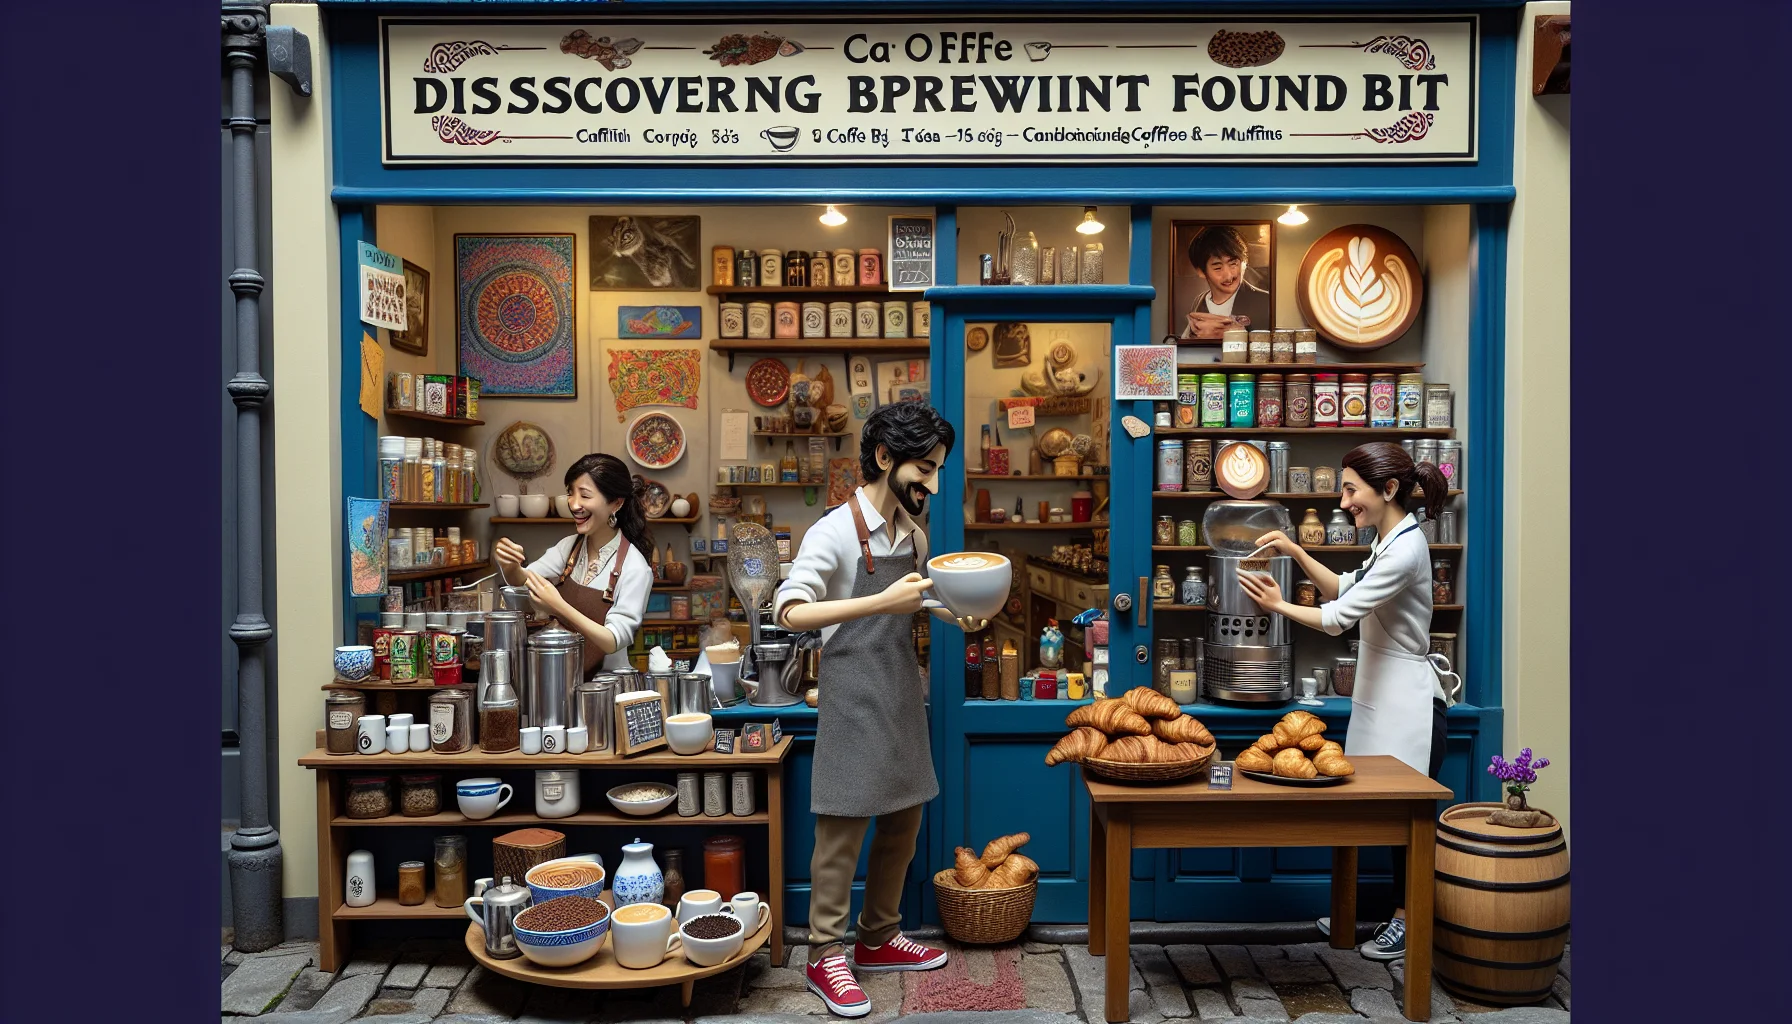 Create a humor-filled scenario portraying the discovery of a cafe that goes by the name 'Discovering Brewing Found Nothing But I'. The small but cozy cafe situated in a bustling city street corner should feature displays of various tea and coffee brewing activities. In the foreground, there should be a barista, a woman of Asian descent, skillfully preparing a complicated latte artwork while another barista, a Hispanic man, is serving a platter of fresh croissants and muffins. On the shelves behind them should be an array of diverse and exotic tea and coffee products from around the world.